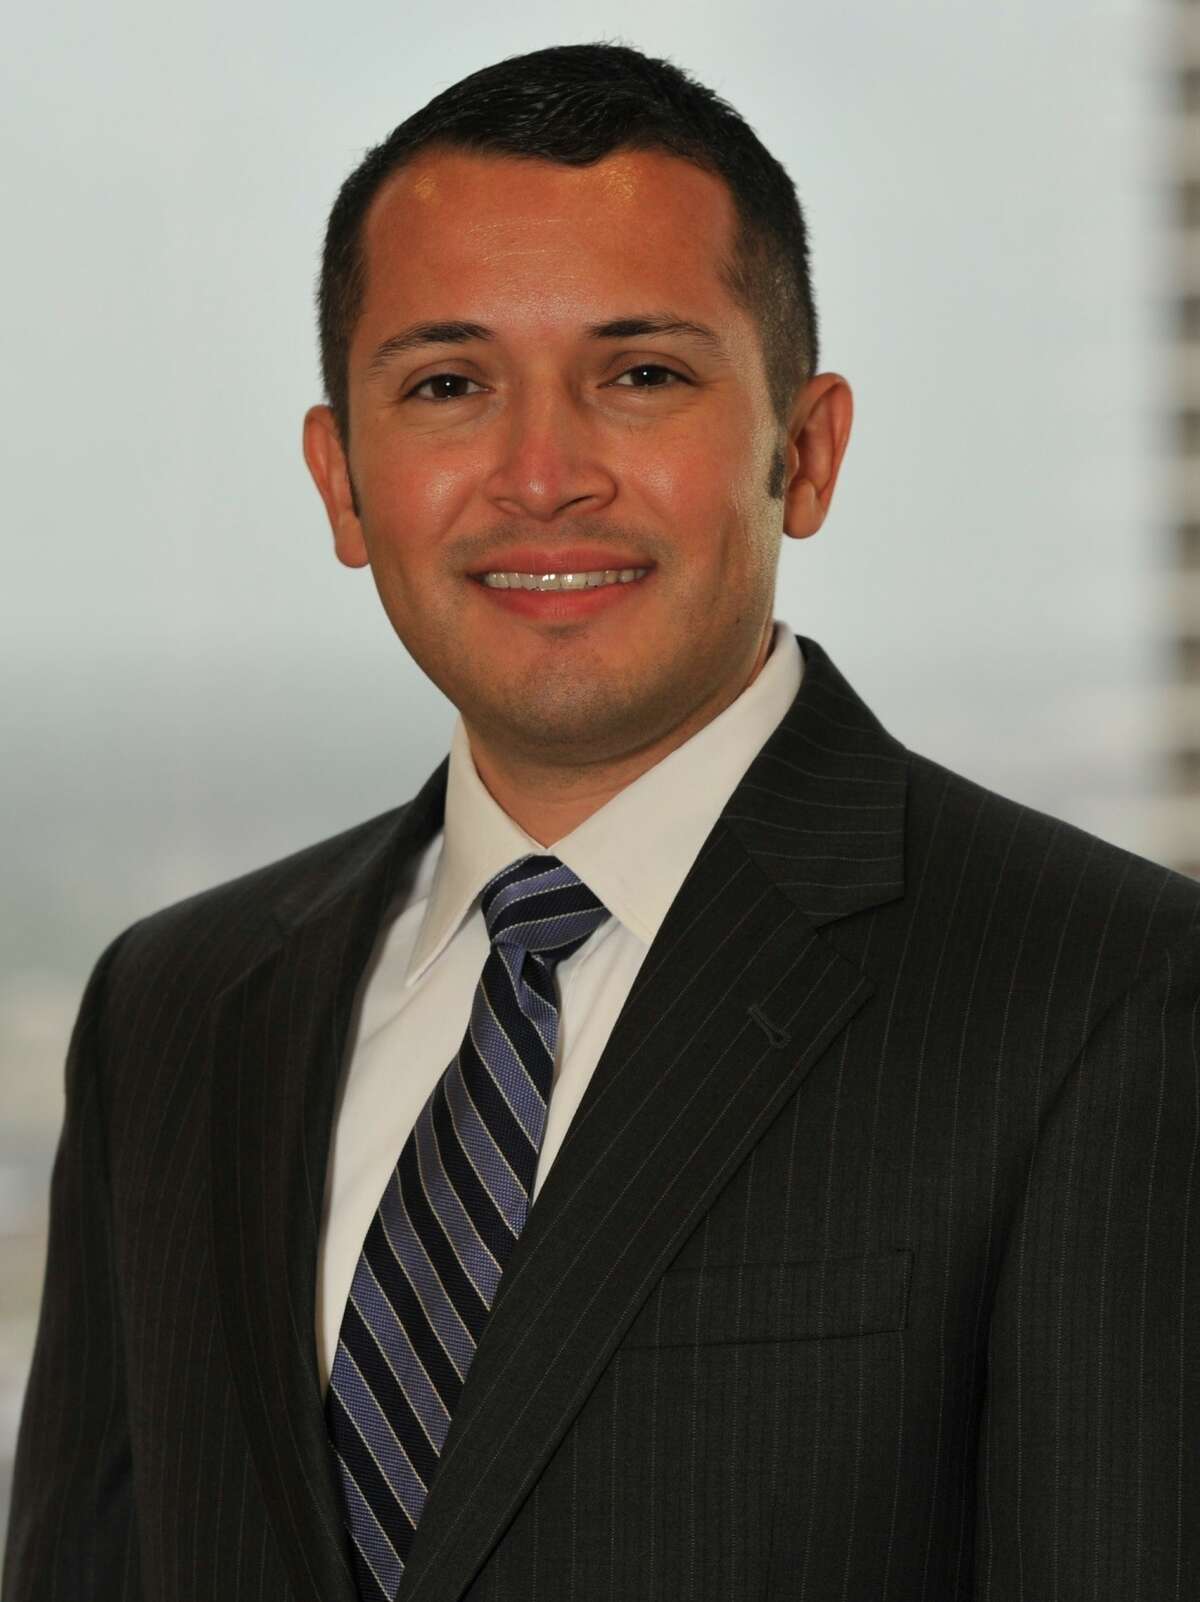 Jerry Guerrero has joined Hines as director of diversity & inclusion in the global real estate firmÂ?’s human resources department. Houston-based Hines hasÂ a presence in 189 cities in 20 countries and $96.5 billion of assets under management.